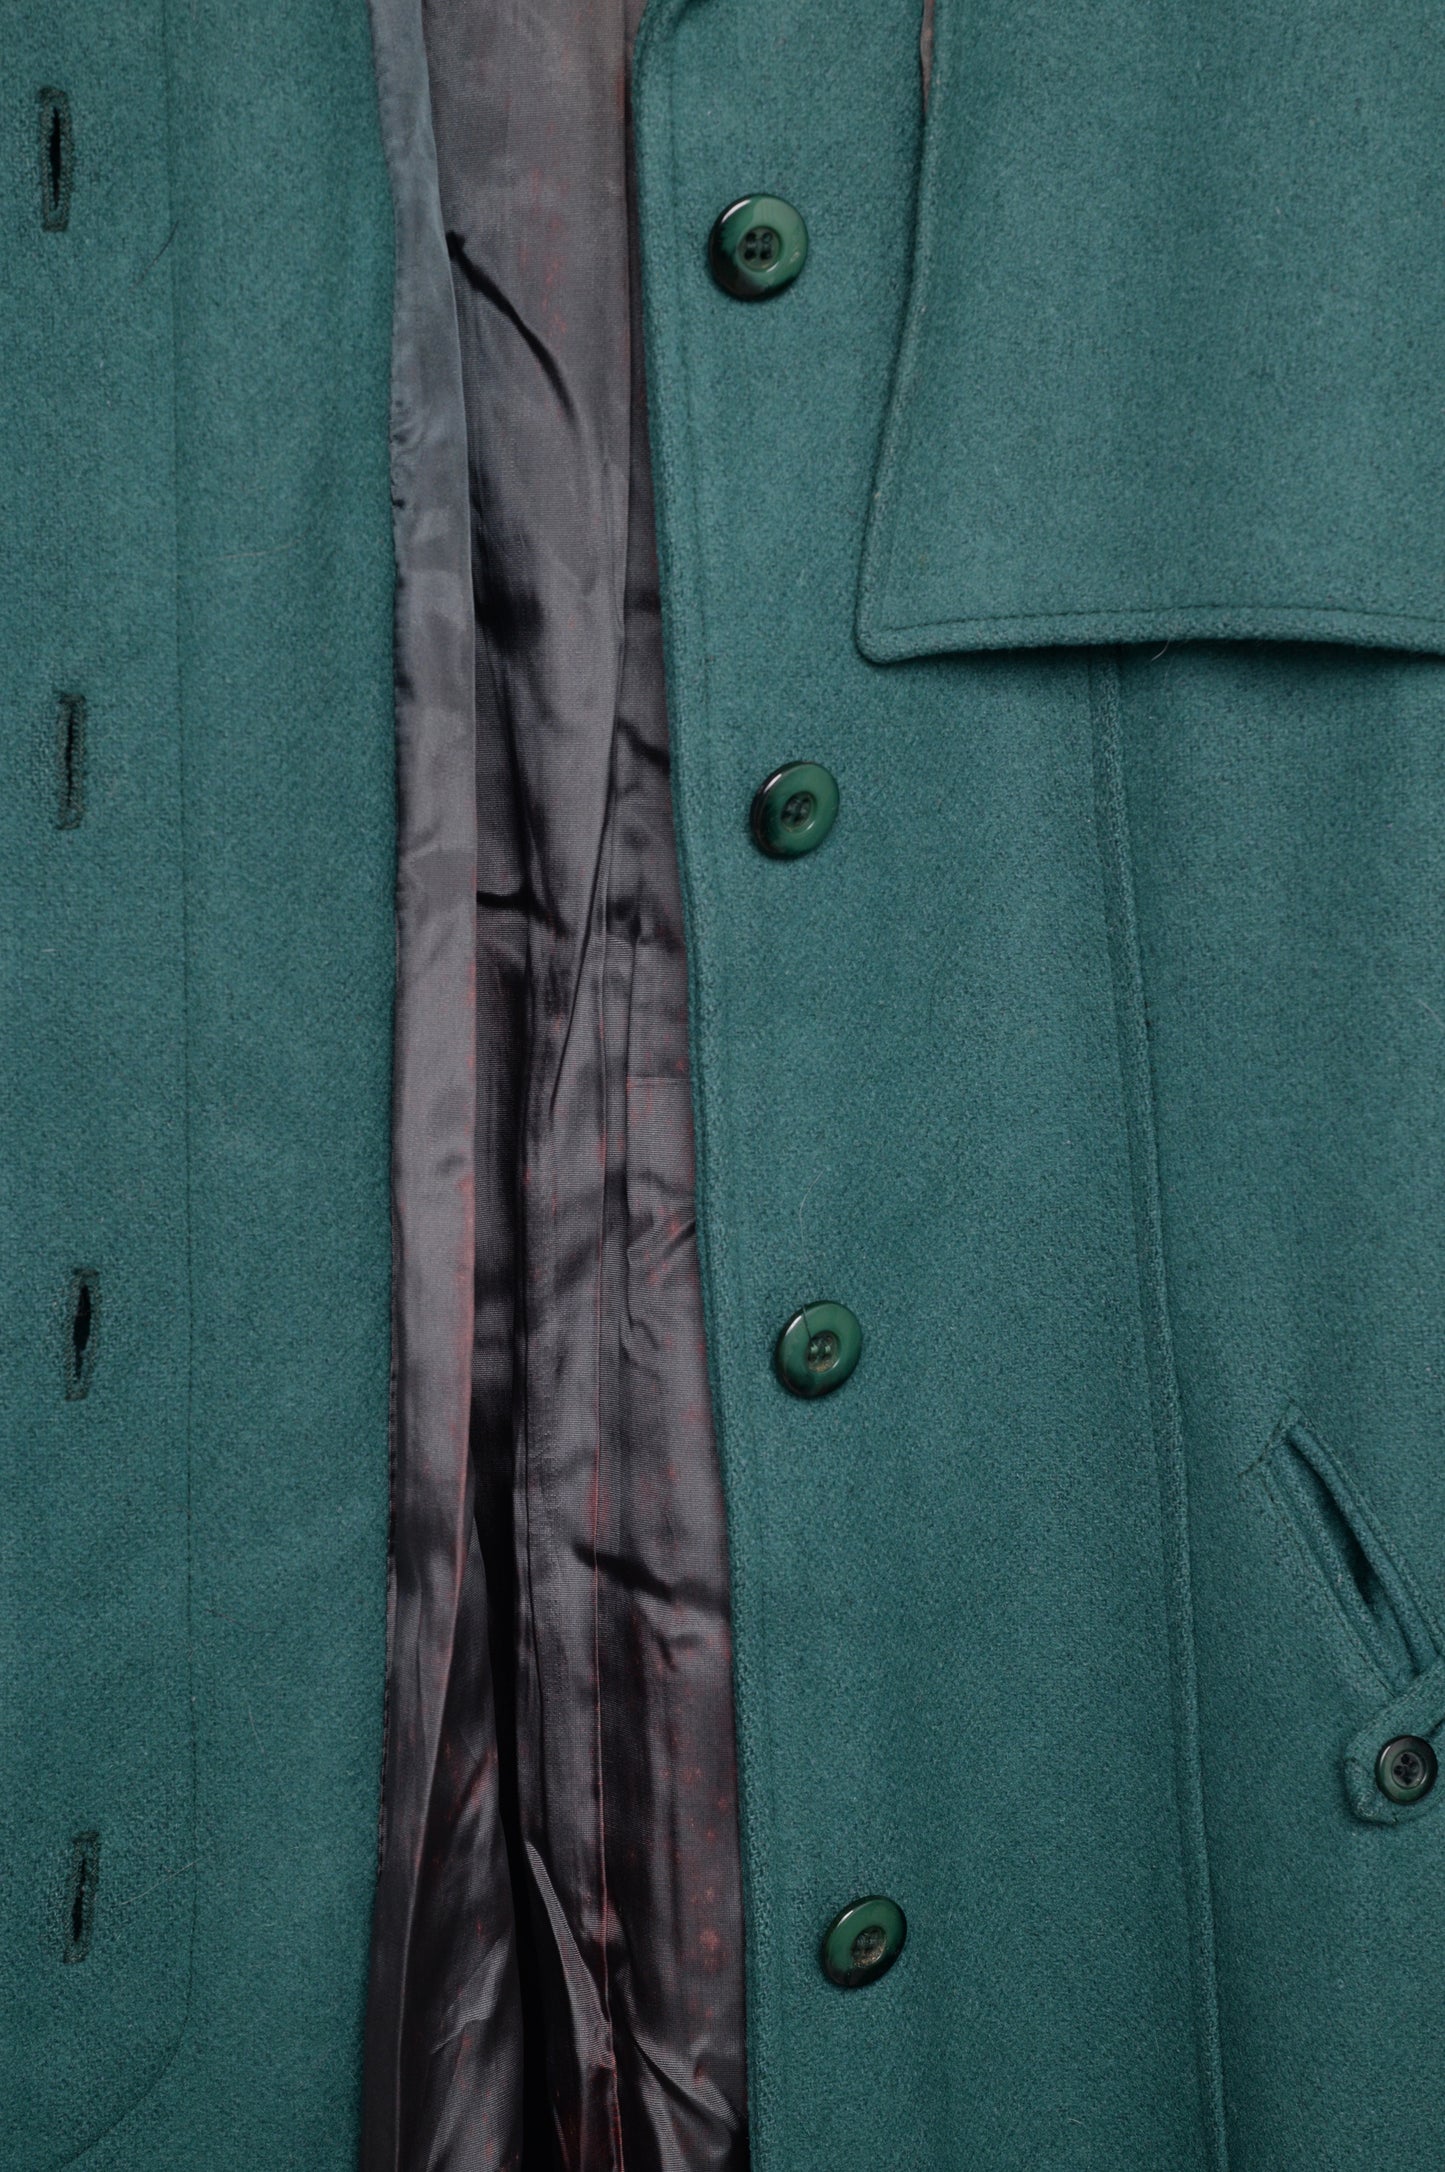 Green Wool Trench Coat